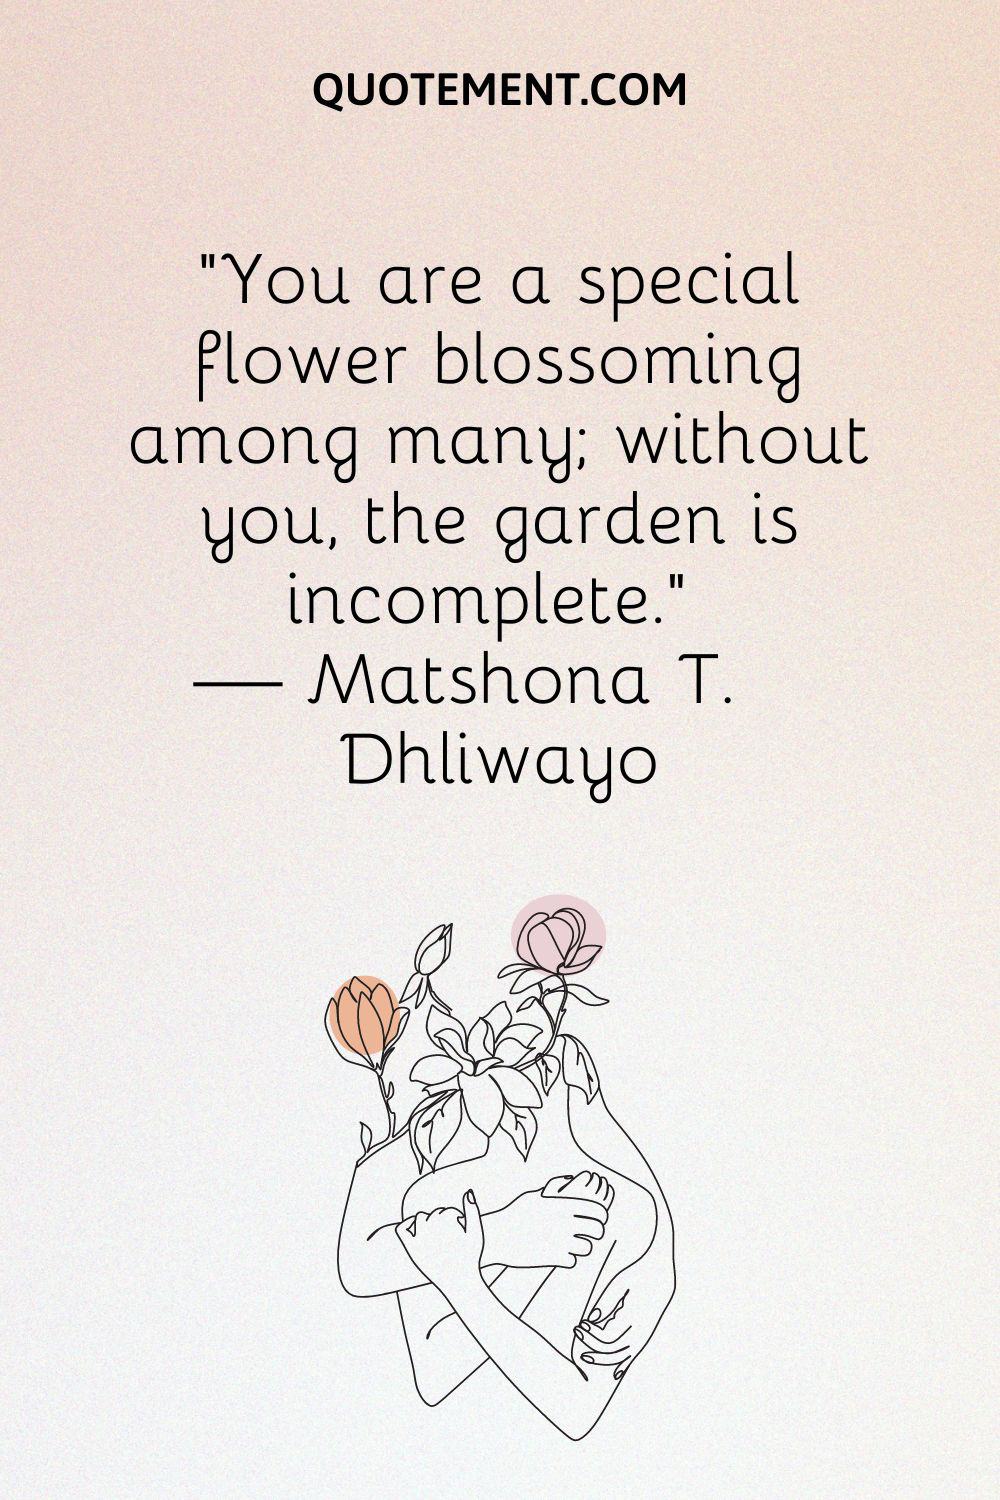 You are a special flower blossoming among many